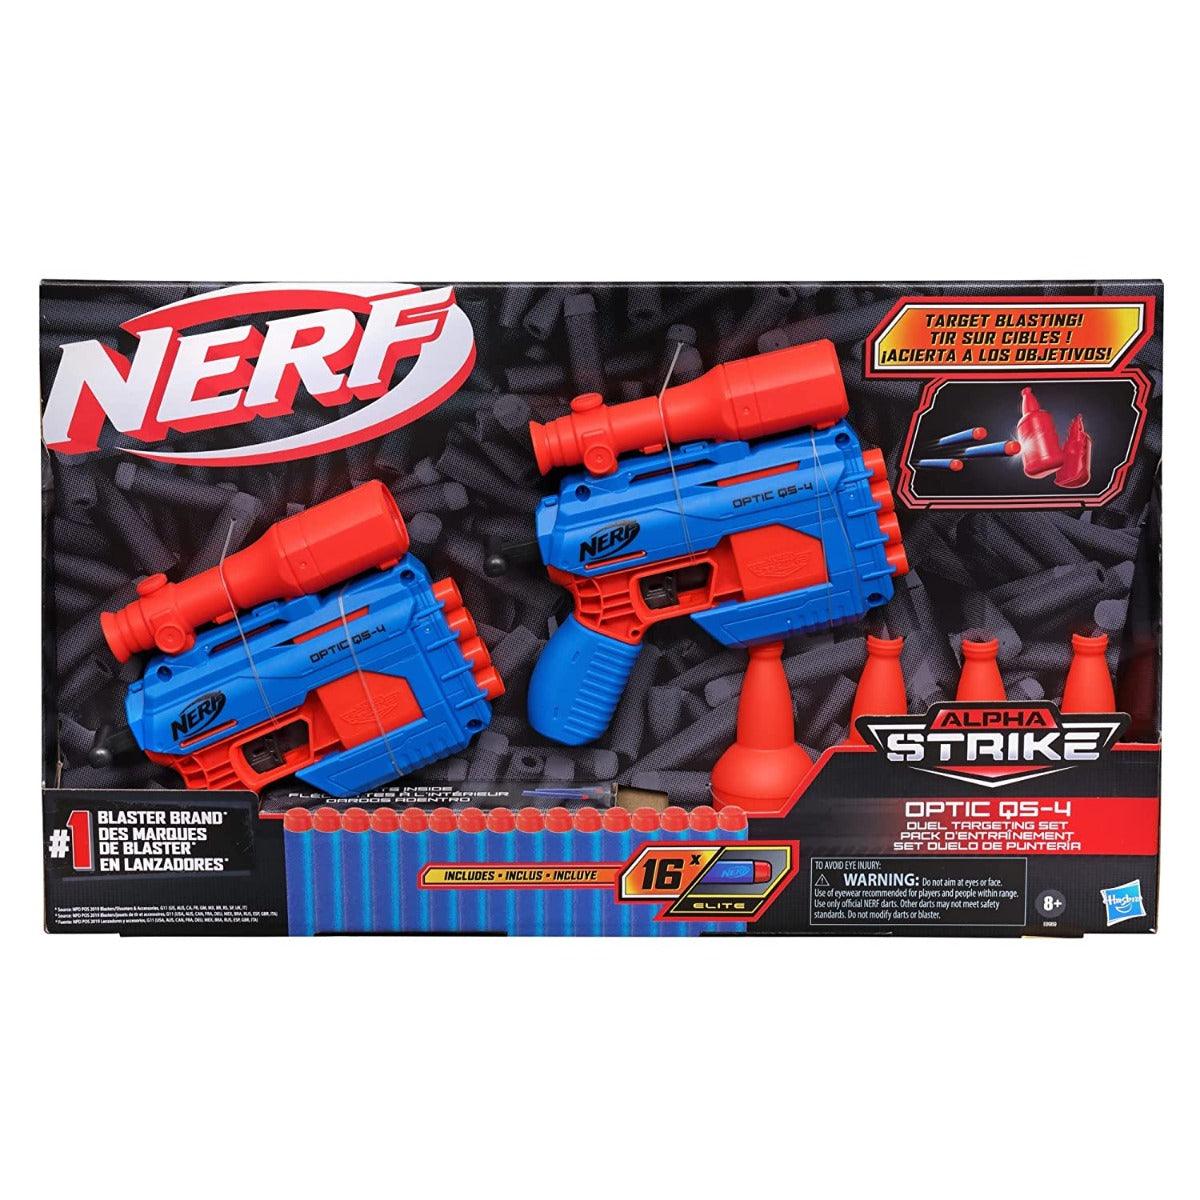 nerf_alpha_strike_optic_qs-4_duel_targeting_set_22-pieces_includes_2_blasters_4_half-targets_16_official_nerf_darts_4